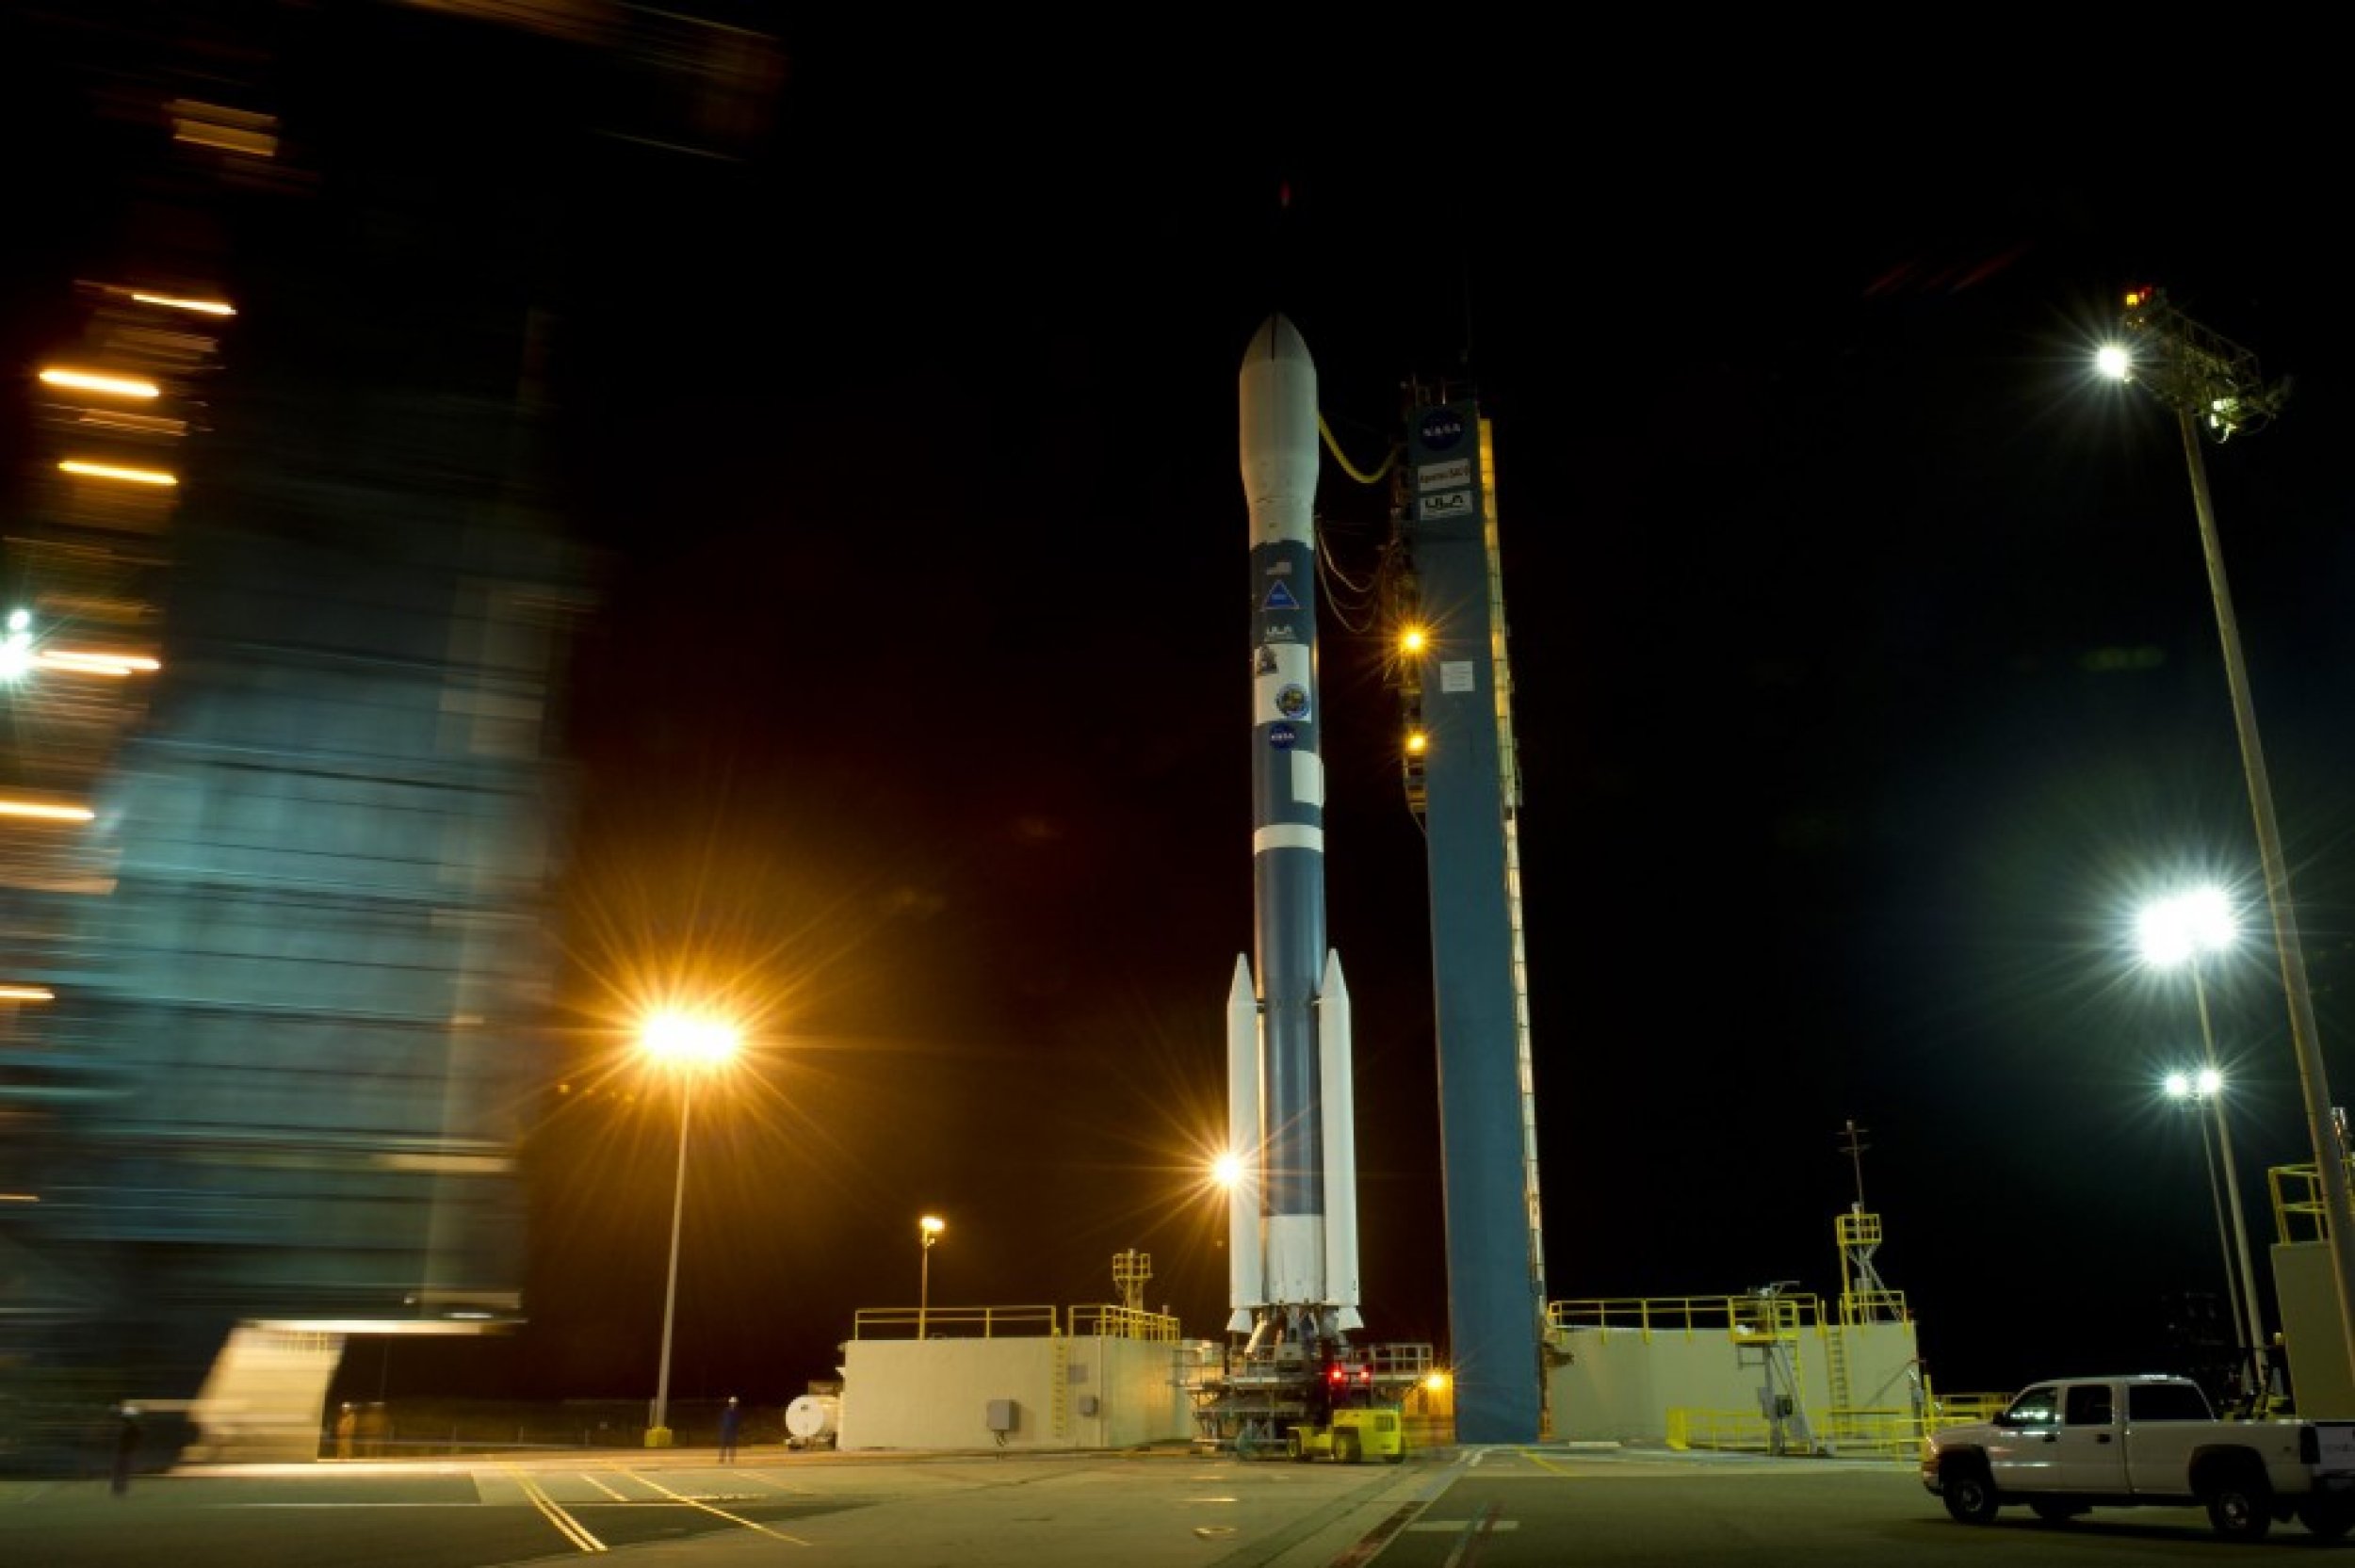 The United Launch Alliance Delta II rocket with the AquariusSAC-D spacecraft payload stands on the launch pad after the service structure was rolled back at Vandenberg Air Force Base in California.